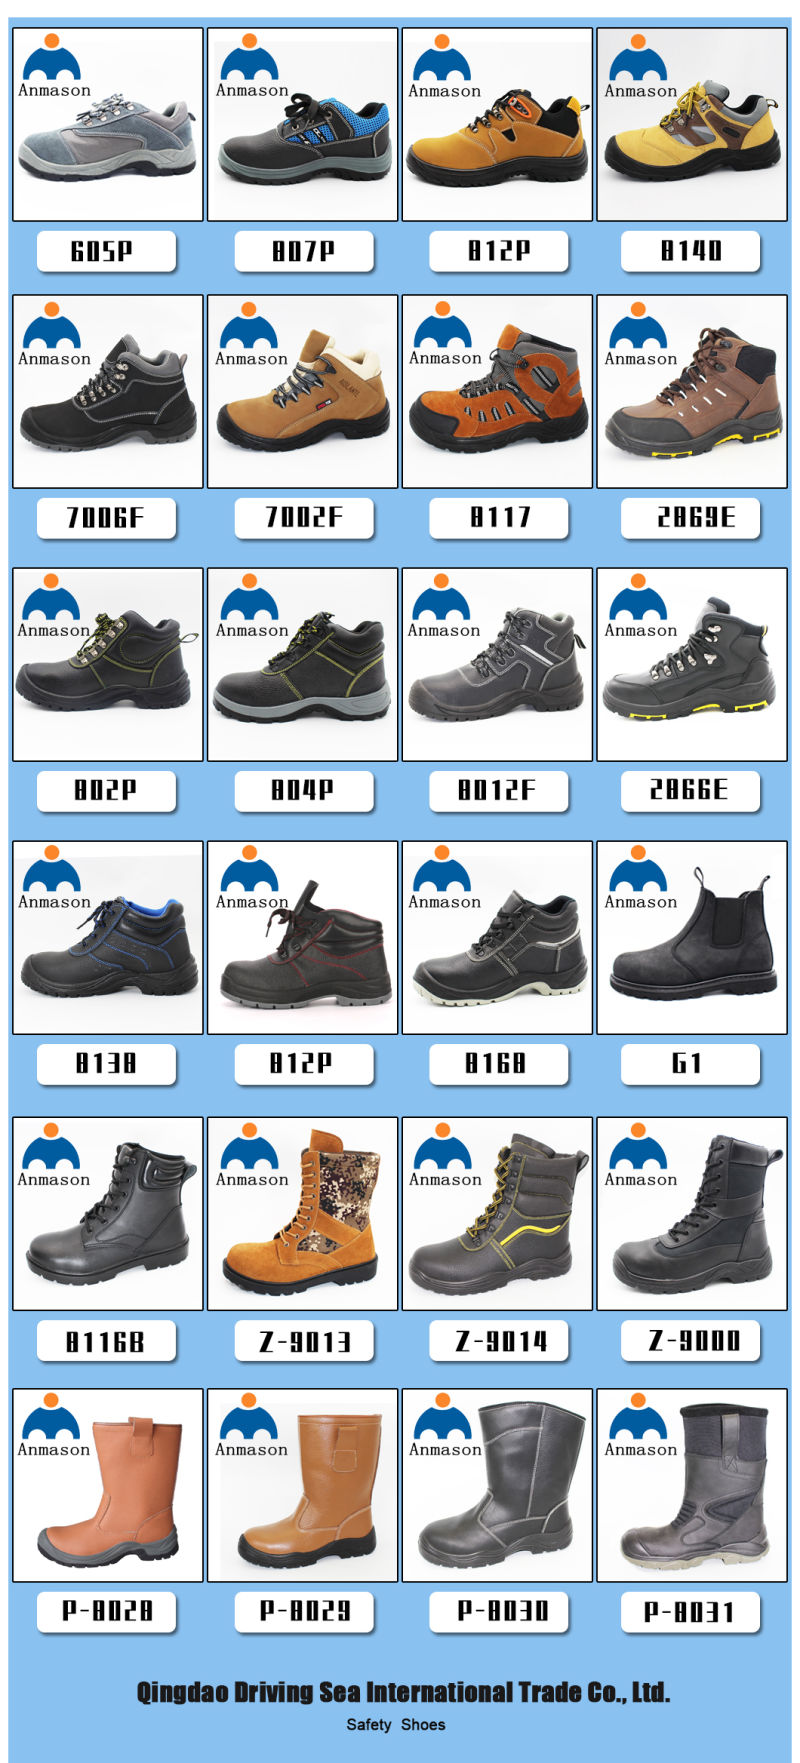 Cheap Industrial Rubber Safety Shoes/Safety Boots for Workers